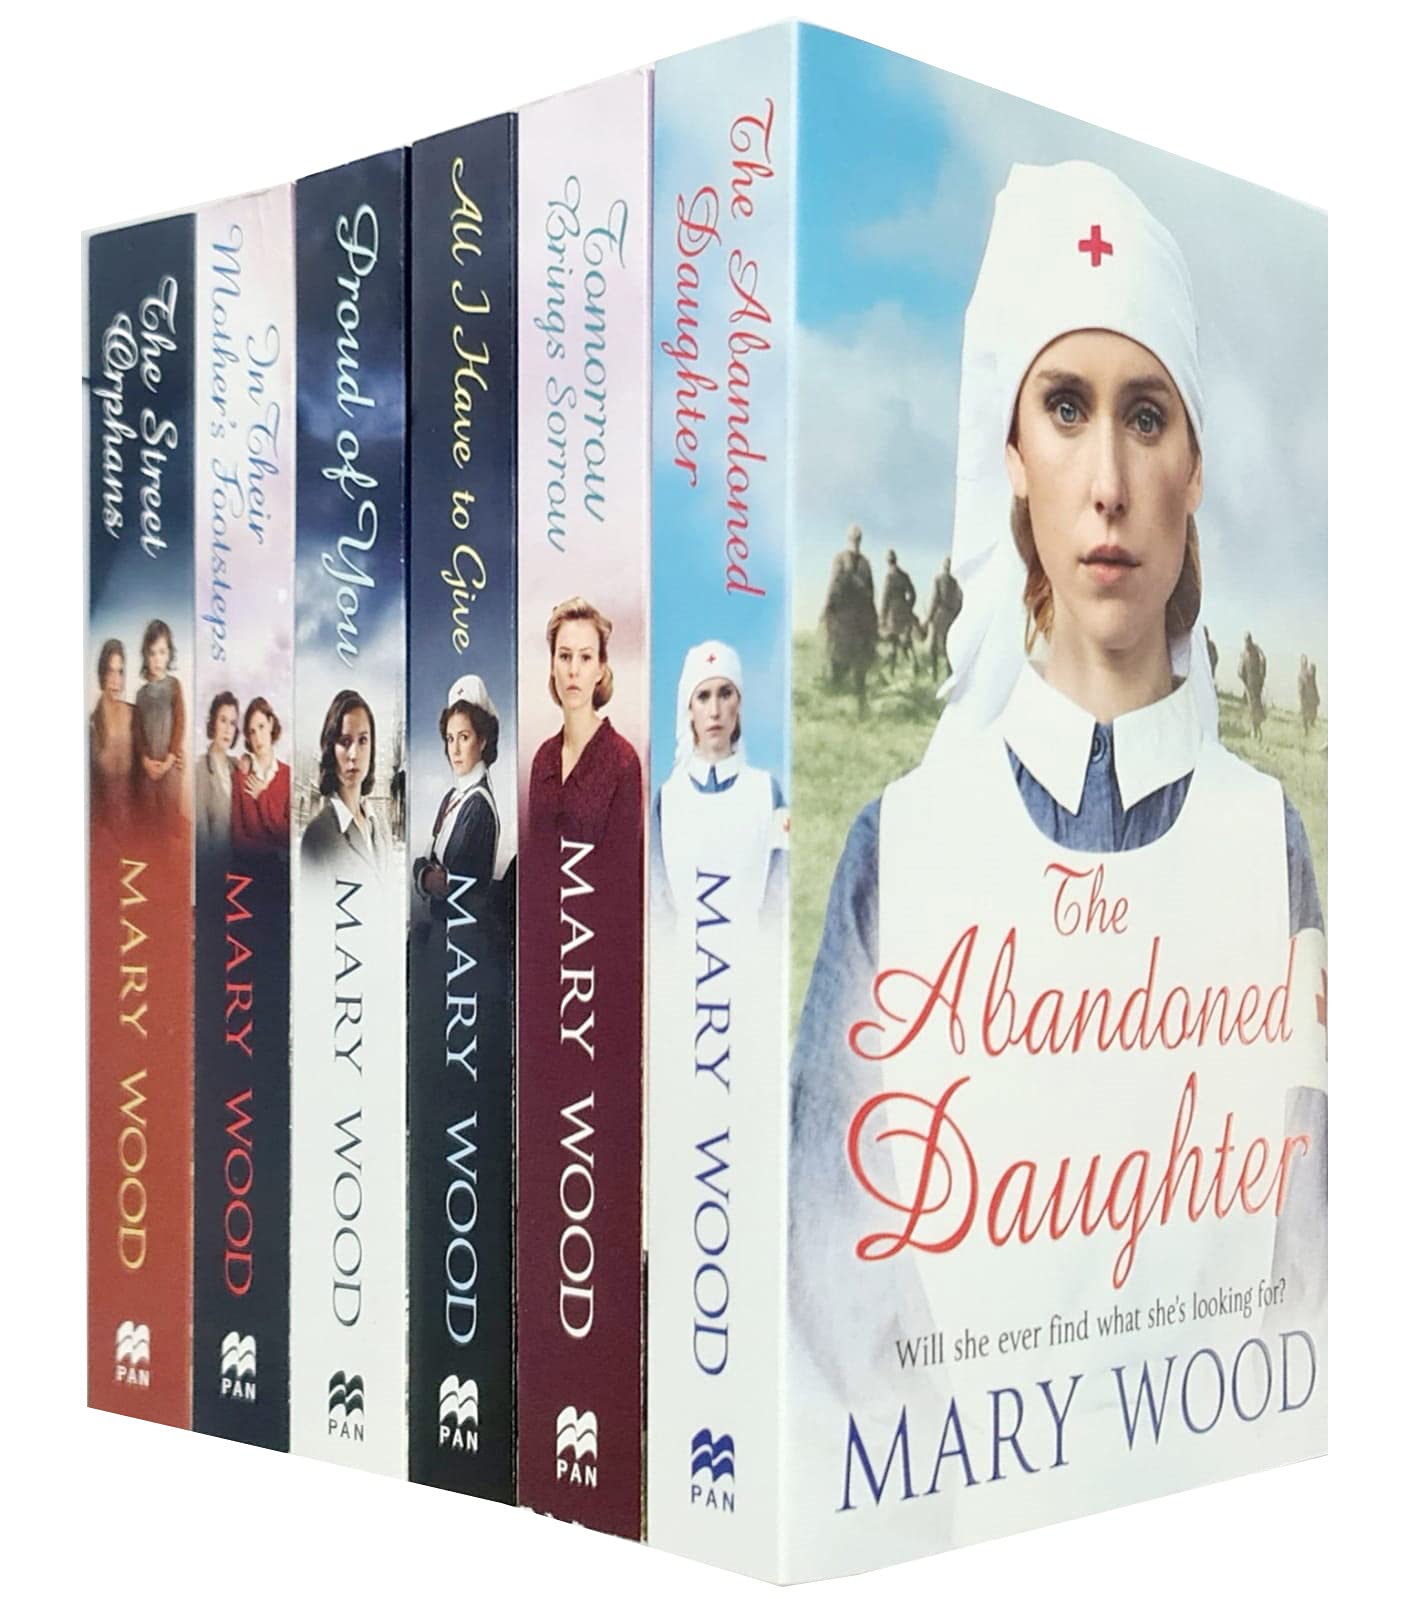 Mary Wood Collection 6 Books Set (The Abandoned Daughter, Proud of You) Paperback - Lets Buy Books